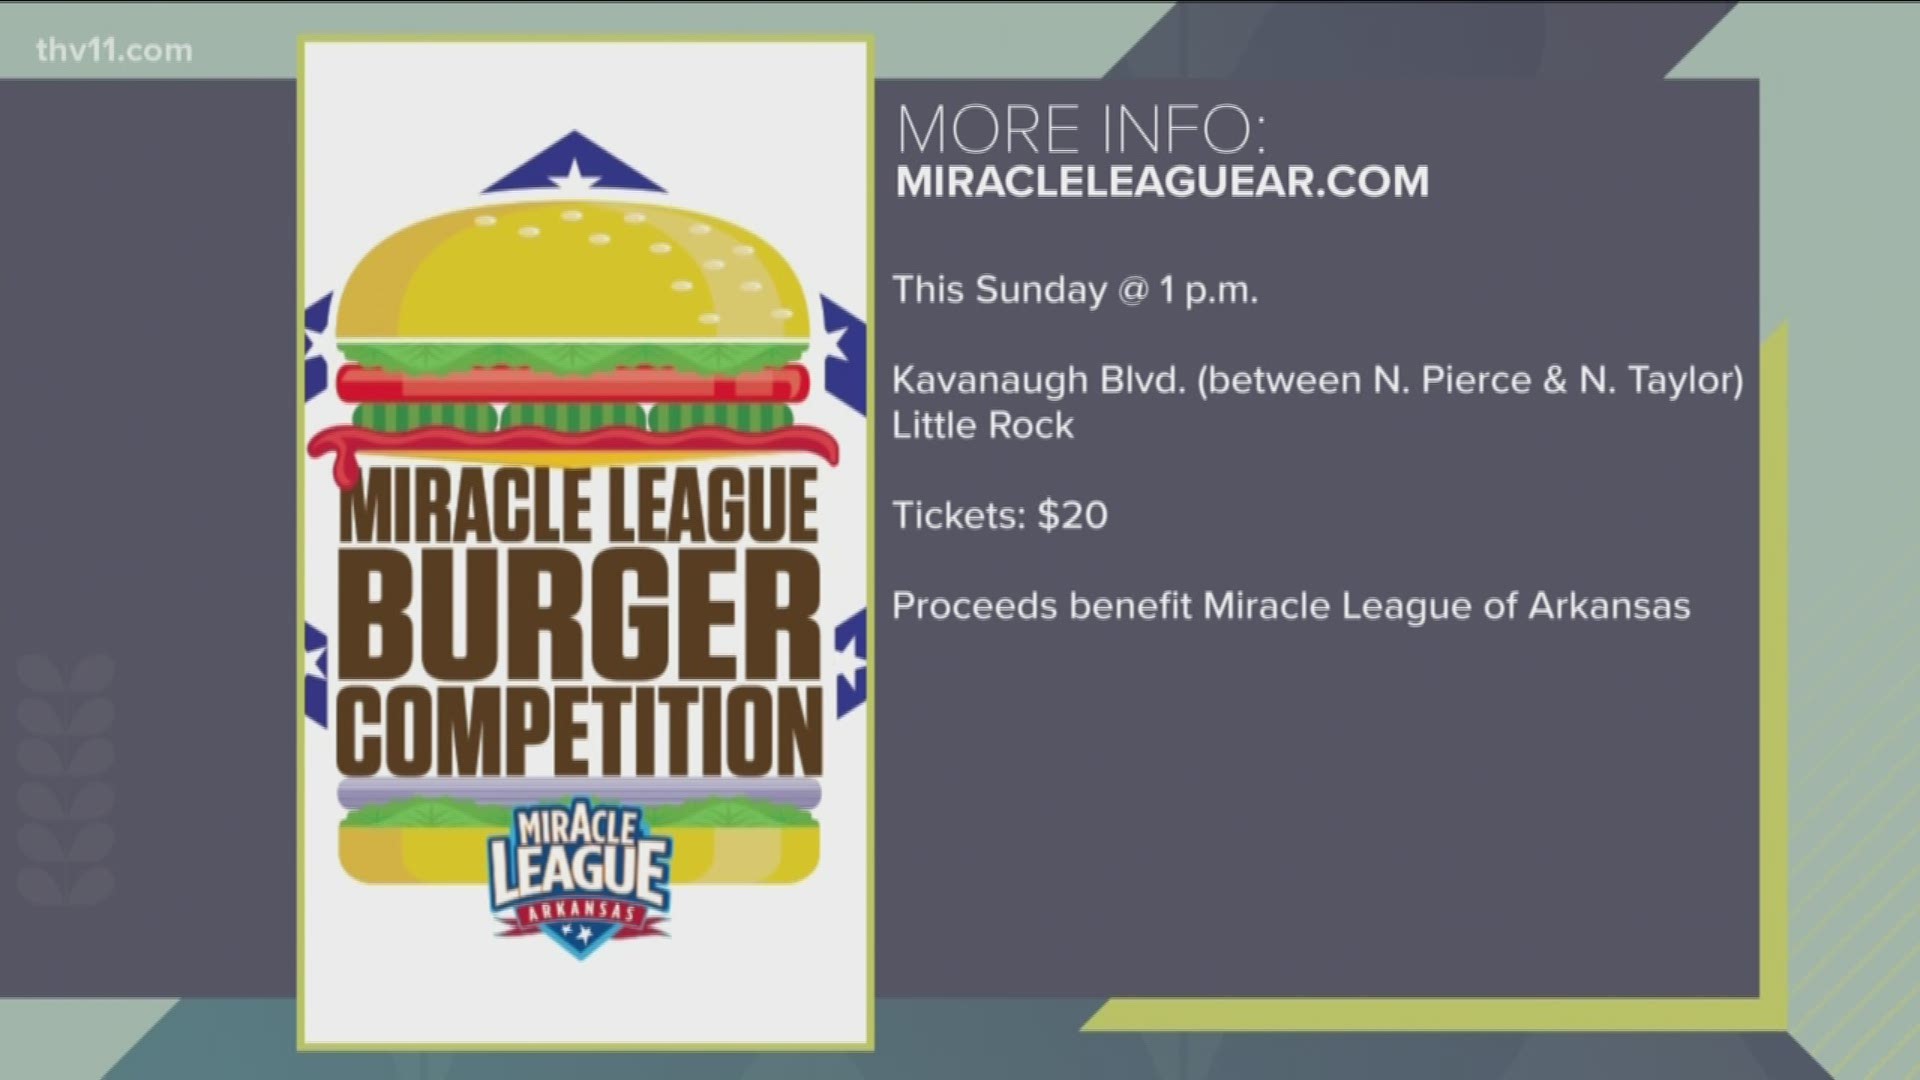 What goes better together than burgers and baseball? The Miracle League of Arkansas is putting on a Burger Competition this Sunday!